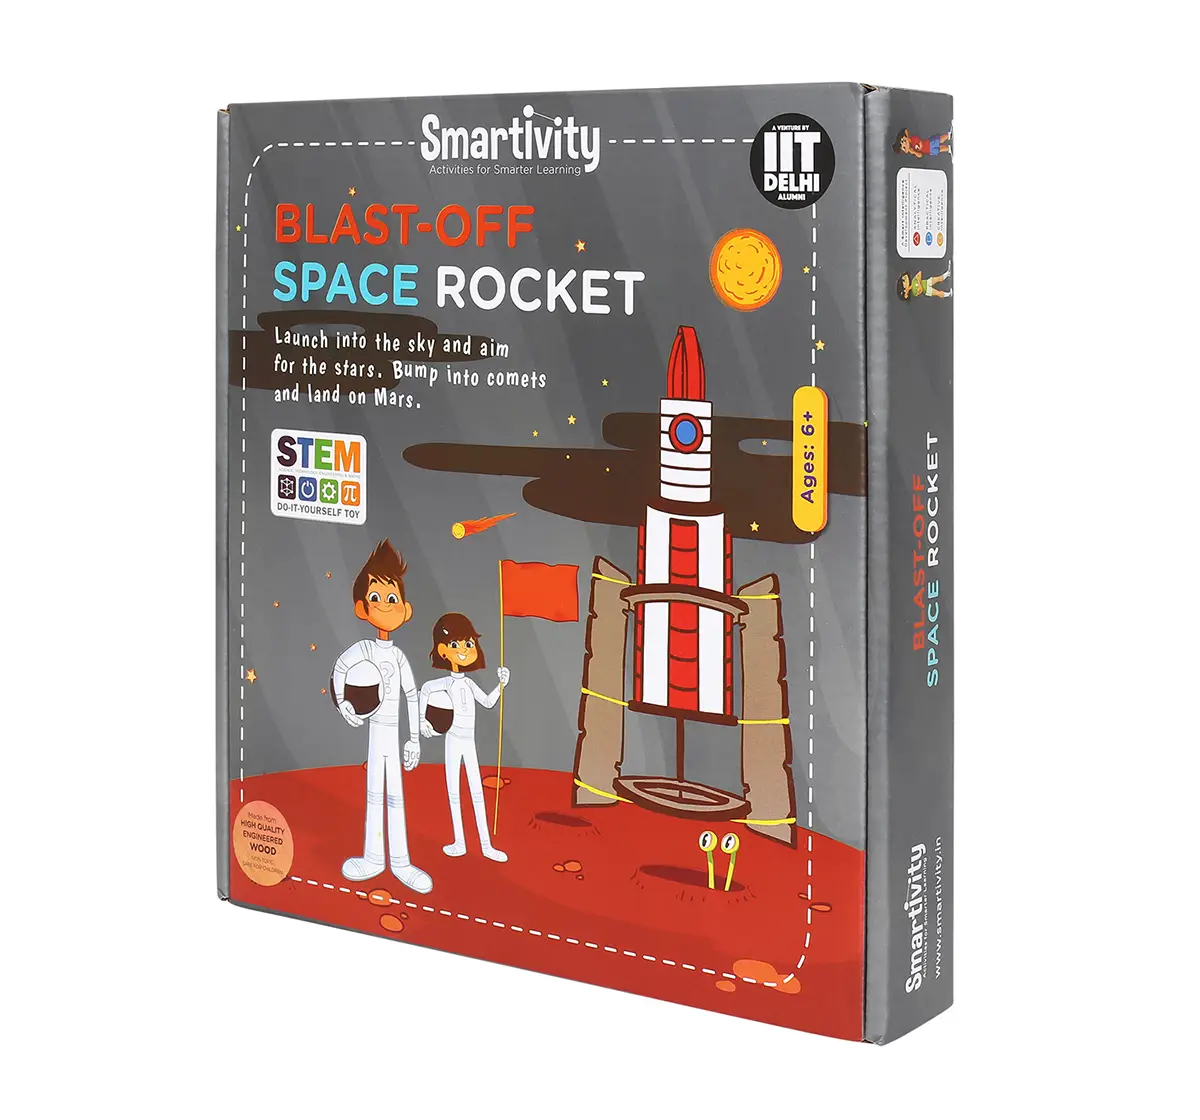 Smartivity Blast Off Space Rocket: Stem, Learning, Educational and Construction Activity Toy Gift for Kids age 6Y+ (Multi-Color)